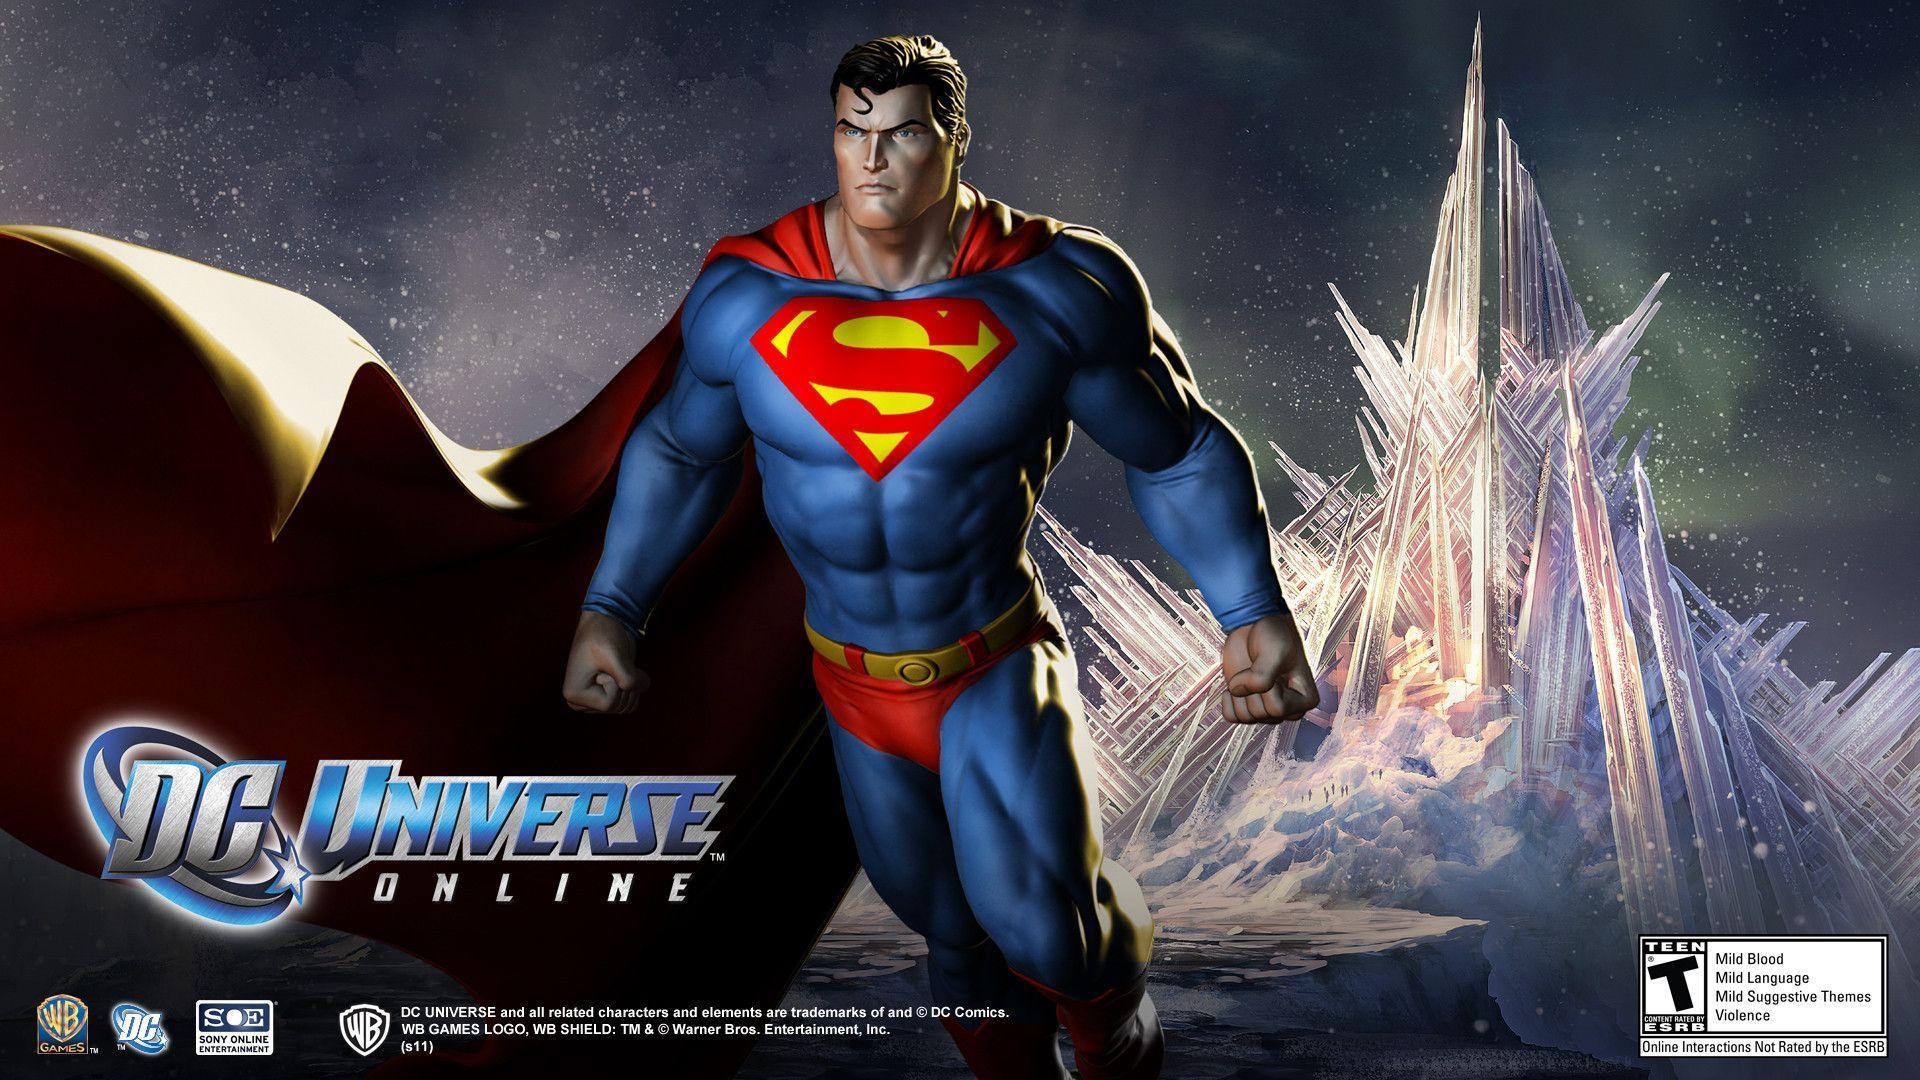 image For > Fortress Of Solitude Superman